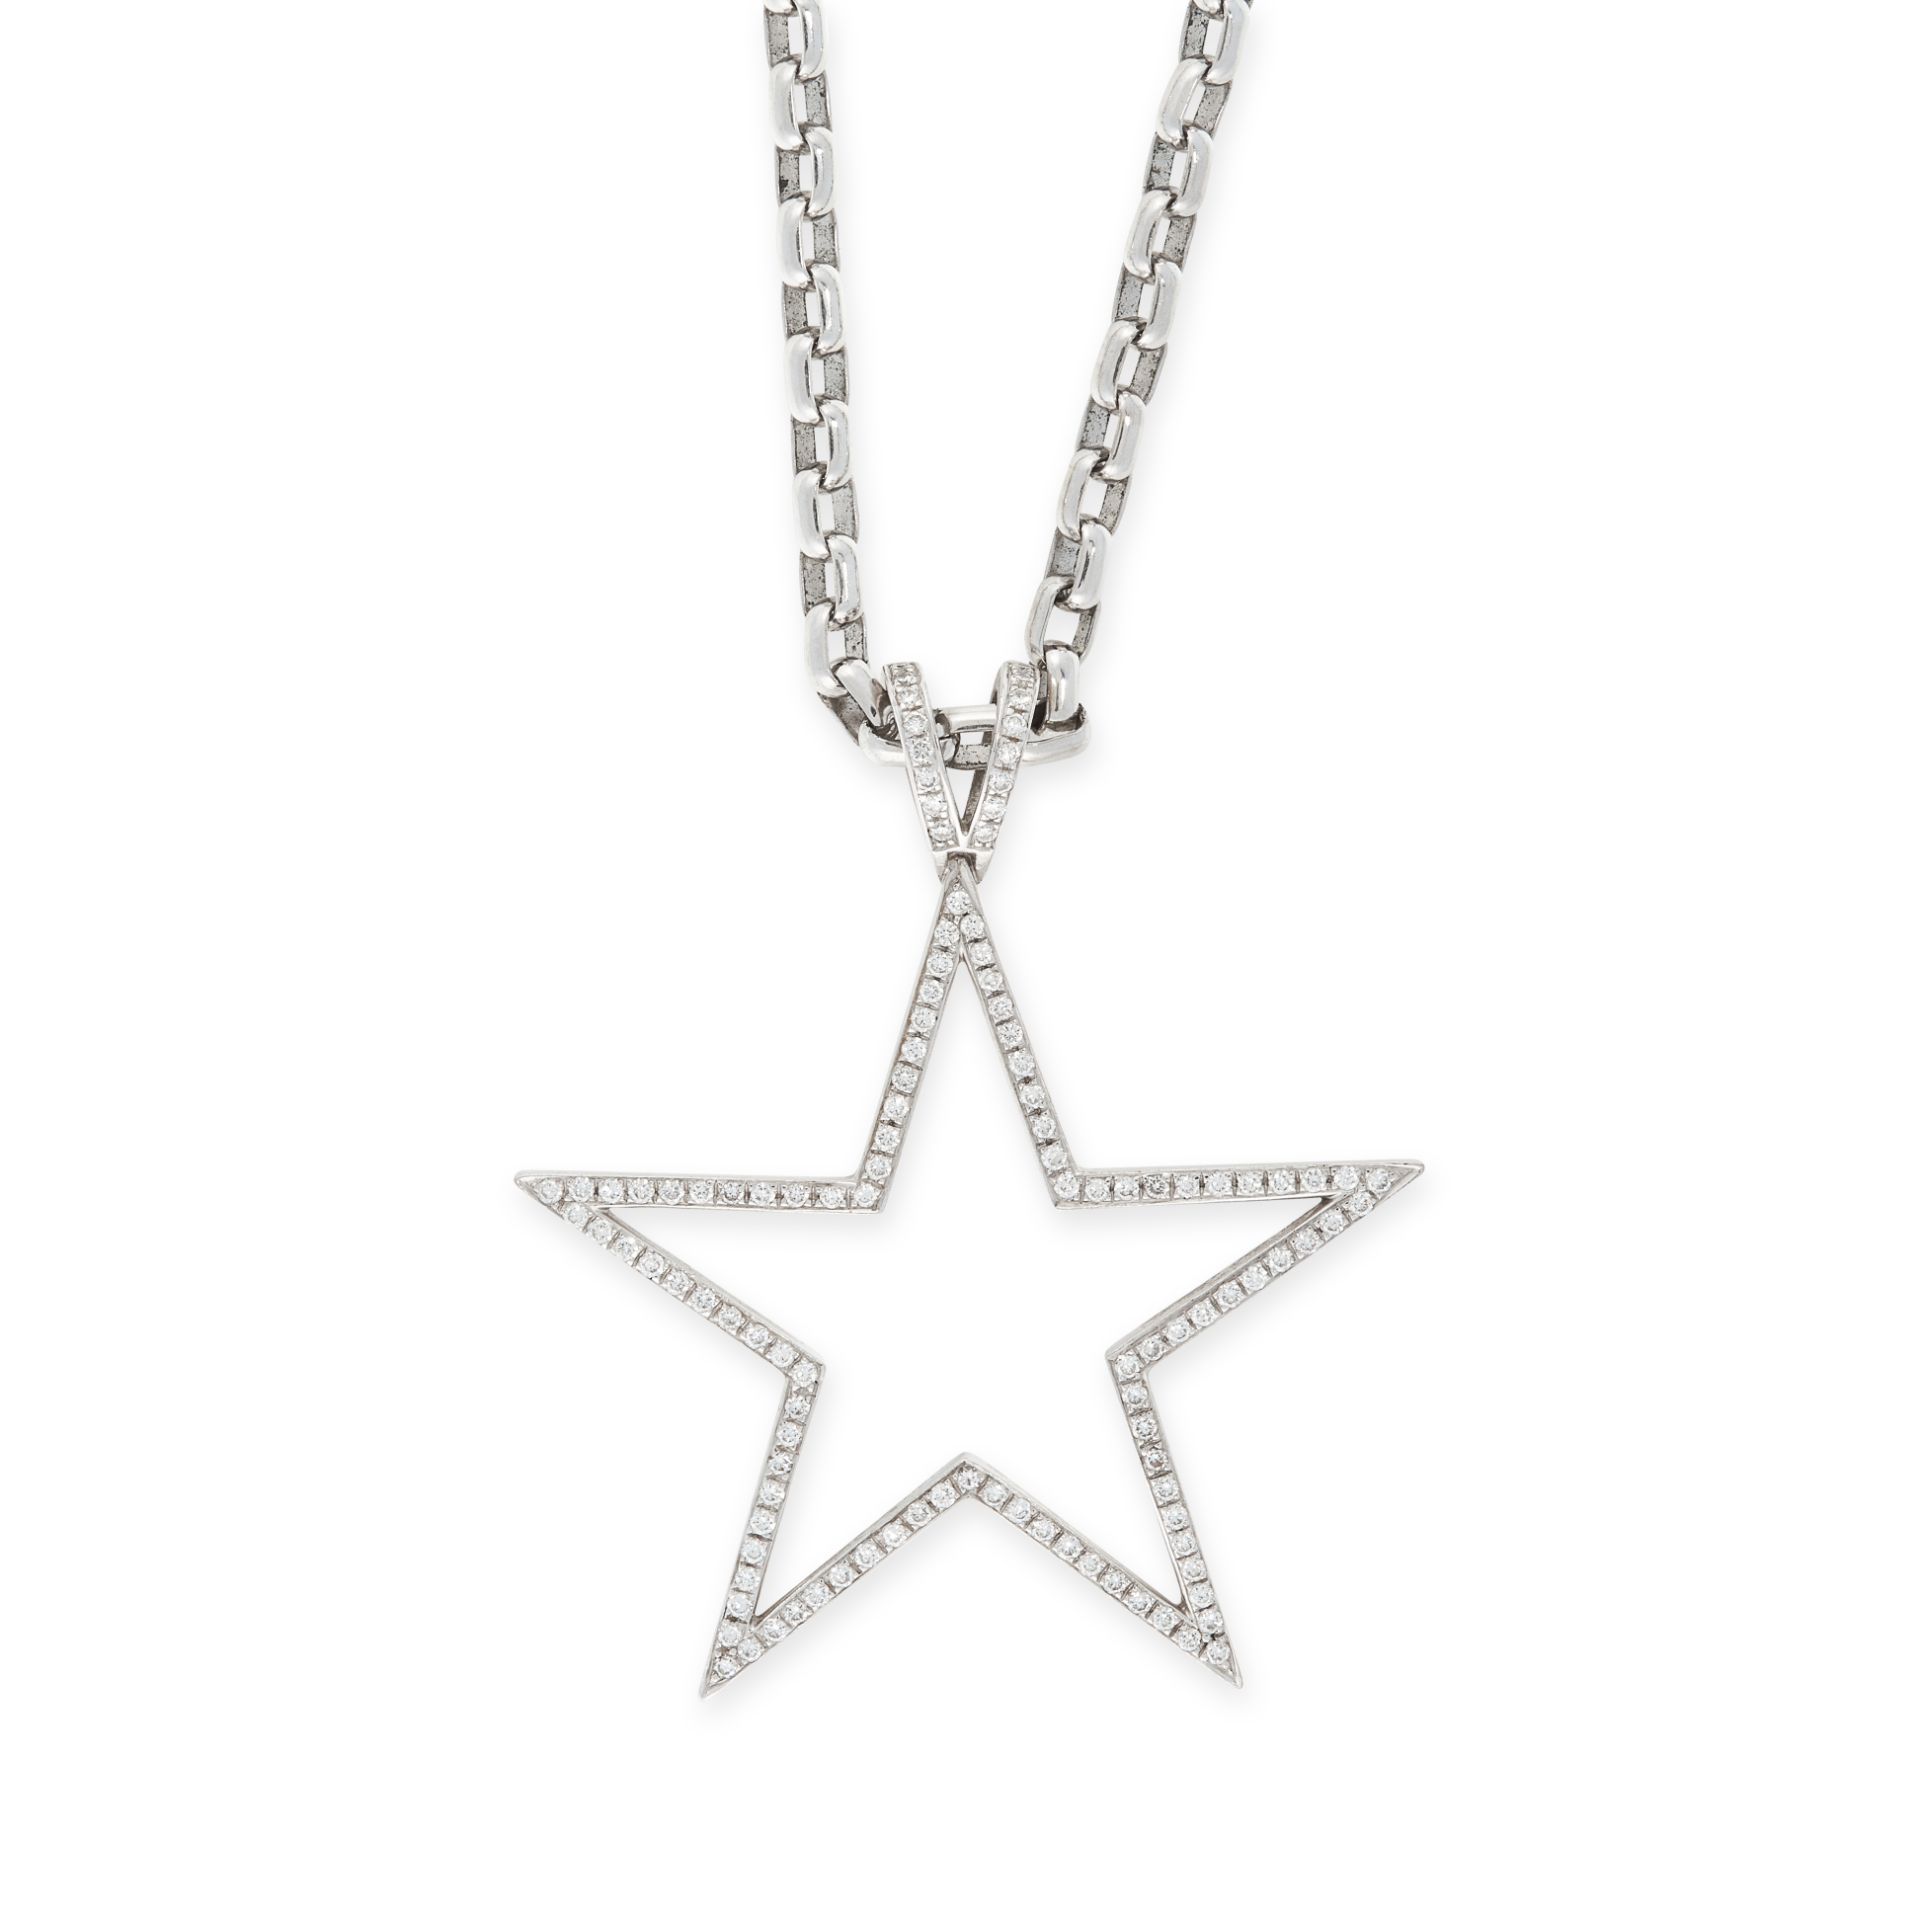 A DIAMOND STAR PENDANT AND CHAIN, THEO FENNELL in 18ct white gold, the pendant designed as the